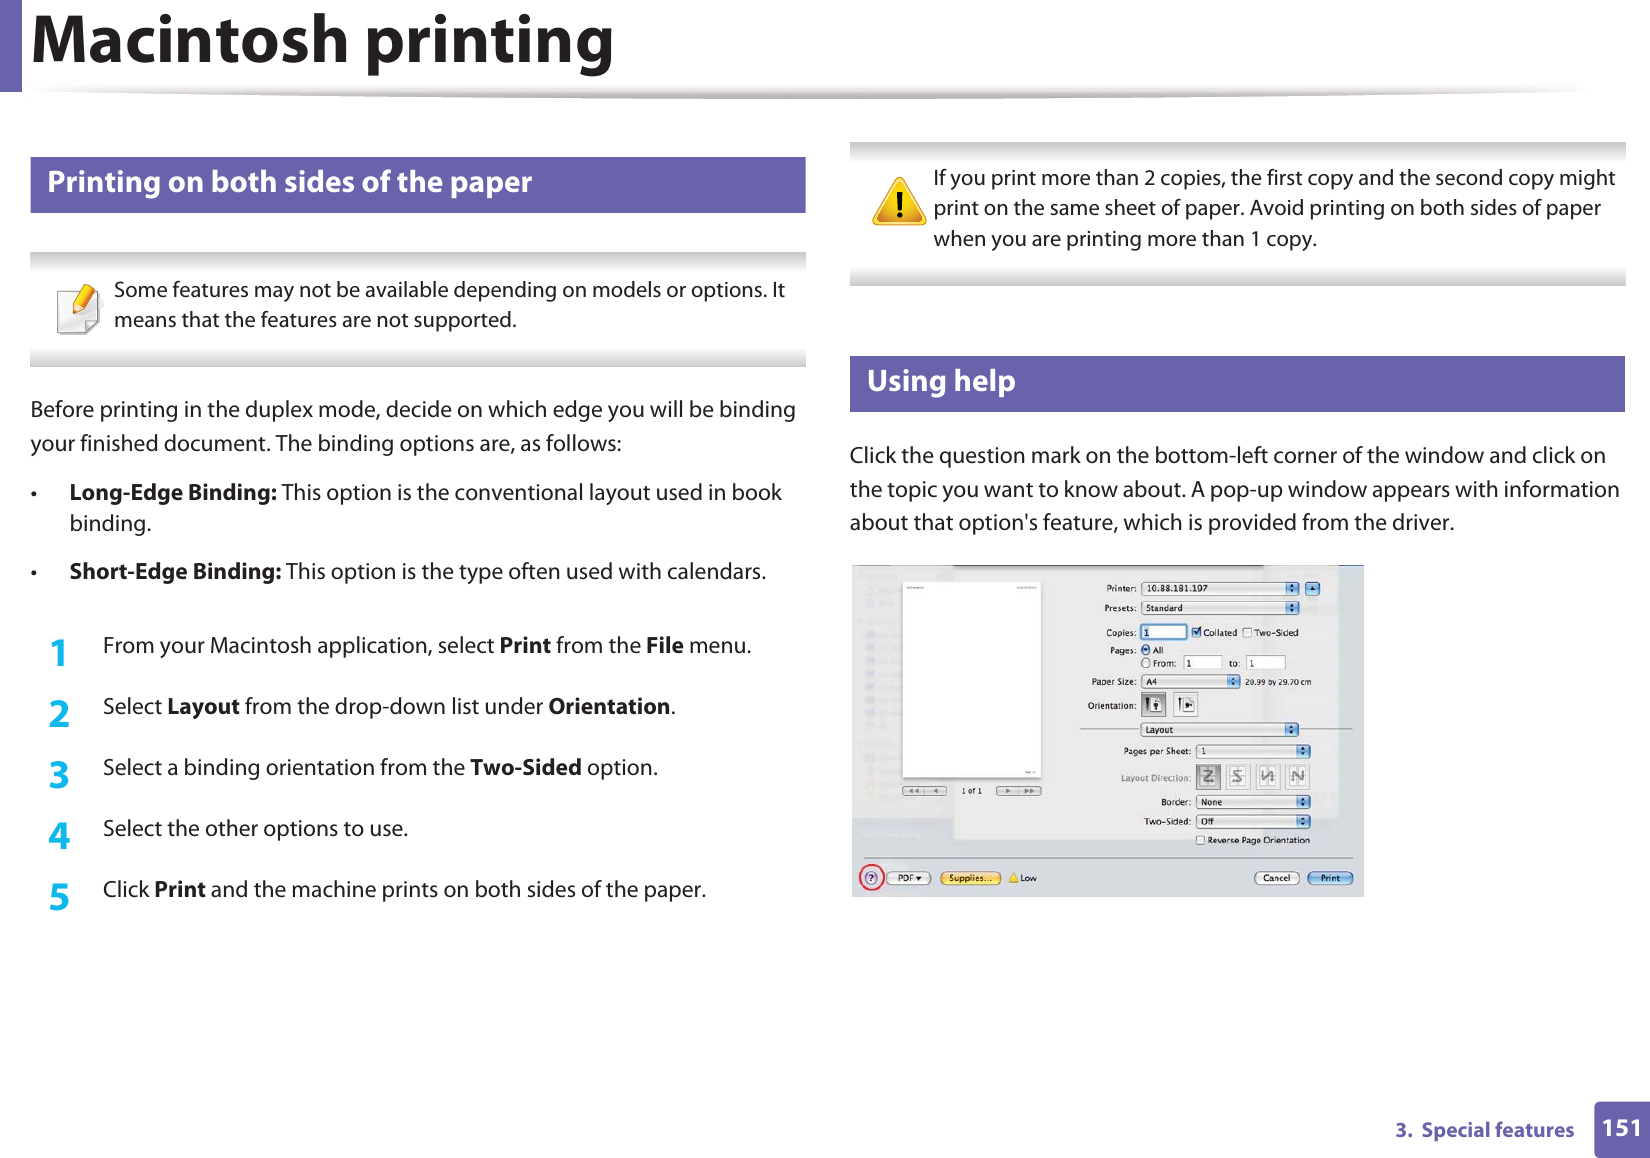 Macintosh printing1513.  Special features11 Printing on both sides of the paper Some features may not be available depending on models or options. It means that the features are not supported. Before printing in the duplex mode, decide on which edge you will be binding your finished document. The binding options are, as follows:•Long-Edge Binding: This option is the conventional layout used in book binding.•Short-Edge Binding: This option is the type often used with calendars.1From your Macintosh application, select Print from the File menu.2  Select Layout from the drop-down list under Orientation. 3  Select a binding orientation from the Two-Sided option.4  Select the other options to use.5  Click Print and the machine prints on both sides of the paper. If you print more than 2 copies, the first copy and the second copy might print on the same sheet of paper. Avoid printing on both sides of paper when you are printing more than 1 copy. 12 Using helpClick the question mark on the bottom-left corner of the window and click on the topic you want to know about. A pop-up window appears with information about that option&apos;s feature, which is provided from the driver. 